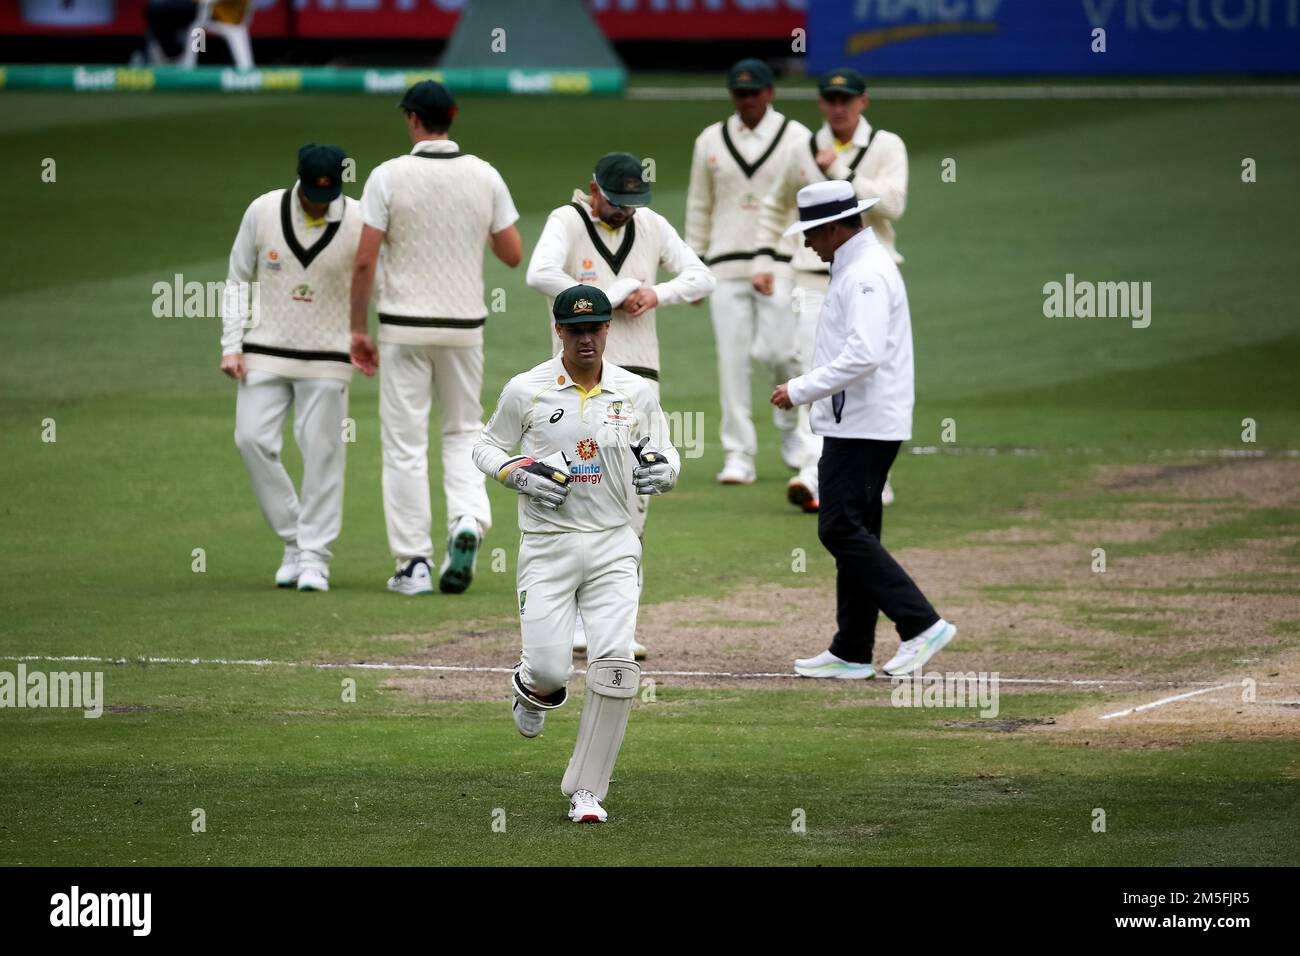 Melbourne, Australia, 29 December, 2022. Alex Carey of Australia during the Boxing Day Test Match between Australia and South Africa at The Melbourne Cricket Ground on December 29, 2022 in Melbourne, Australia. Credit: Dave Hewison/Speed Media/Alamy Live News Stock Photo